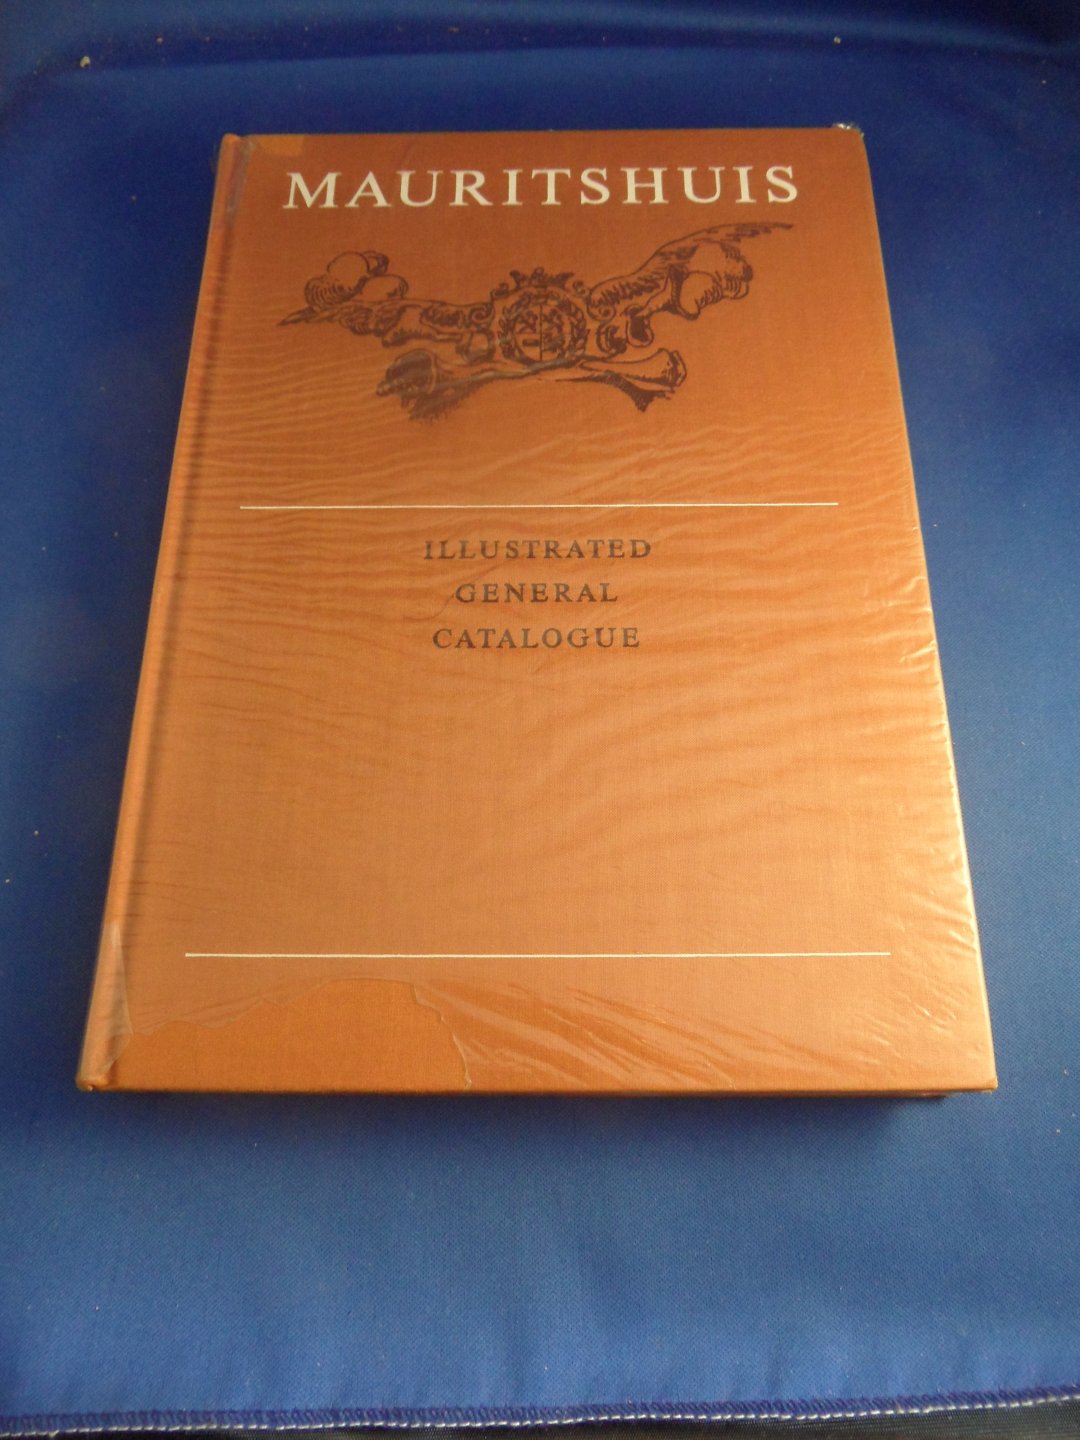  - Mauritshuis. Illustrated general catalogue